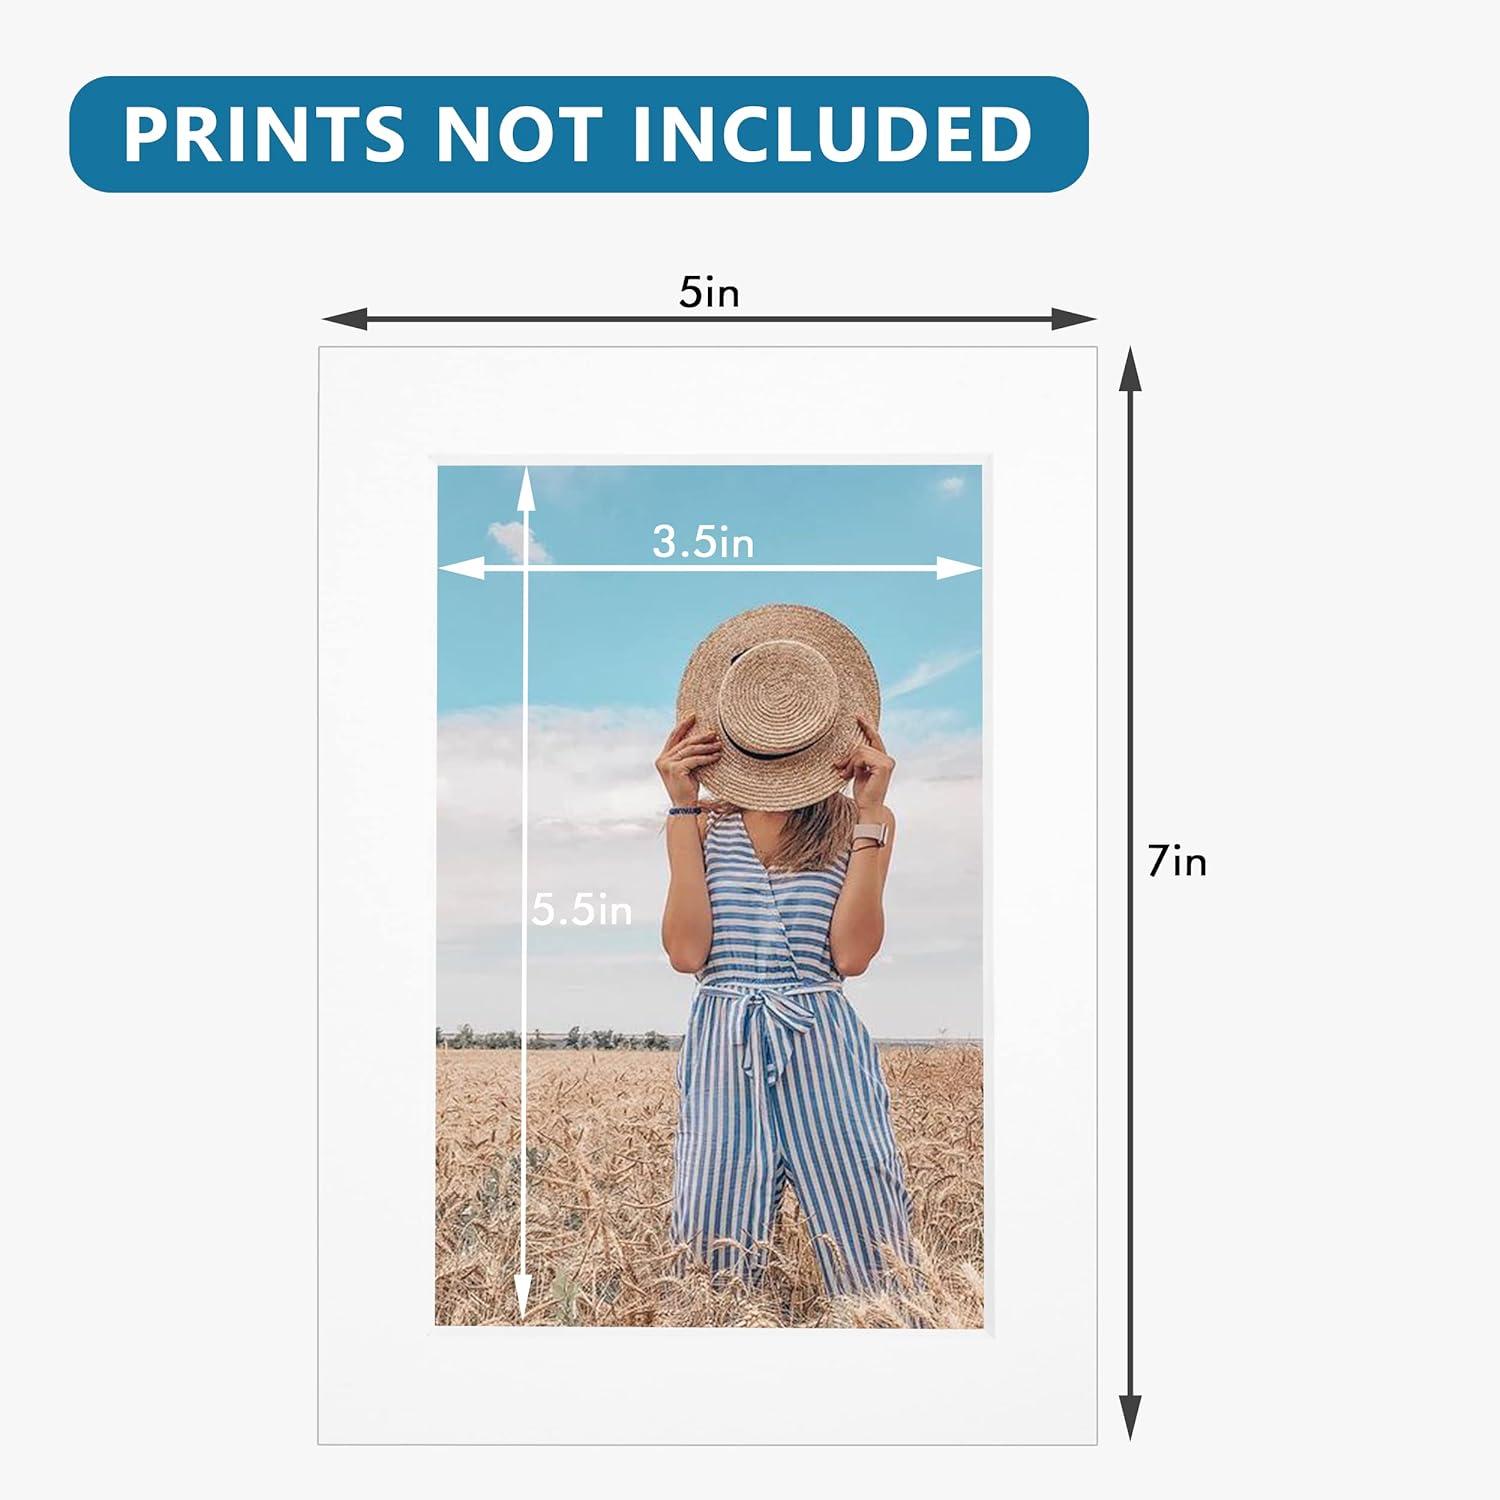 Somime 10 Pack Pre-Cut 11 x 14 White Picture Mats for 8x10 Photos - White  Core Bevel Cut Frame Matte, Acid Free, Ideal for Frames/Artwork/Prints